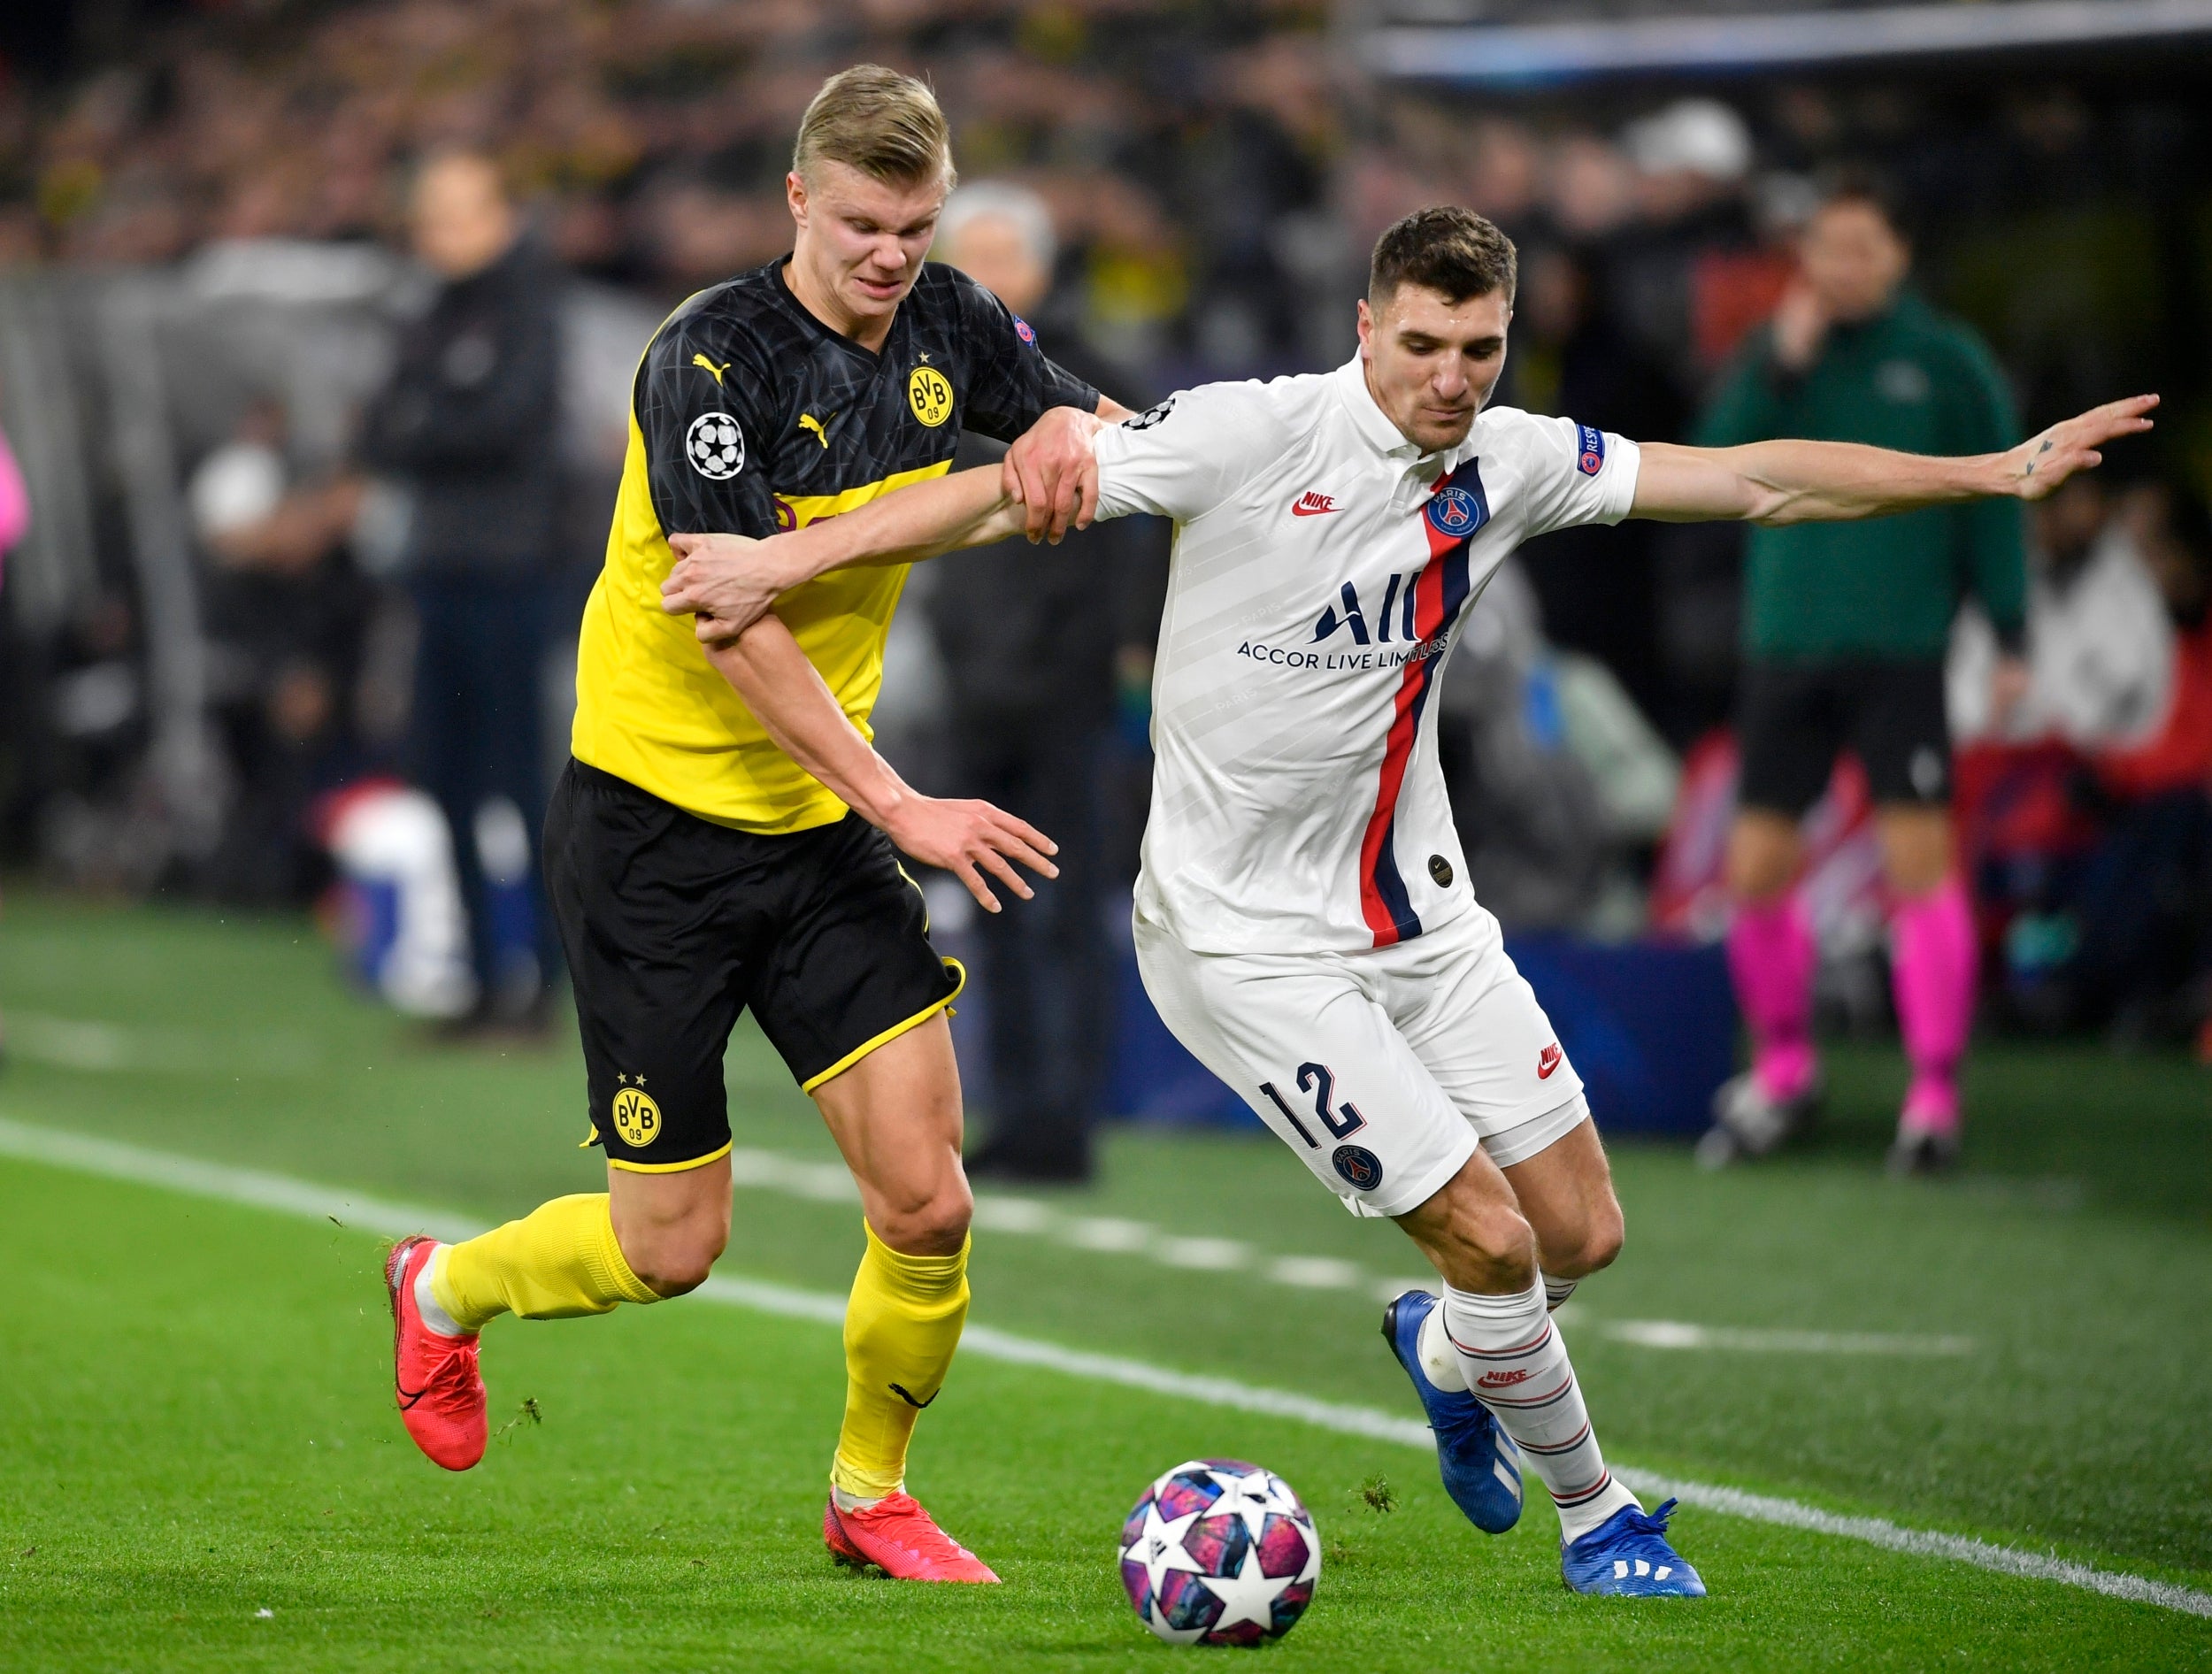 Dortmund vs PSG Erling Haaland’s unconscious drive exposes French side